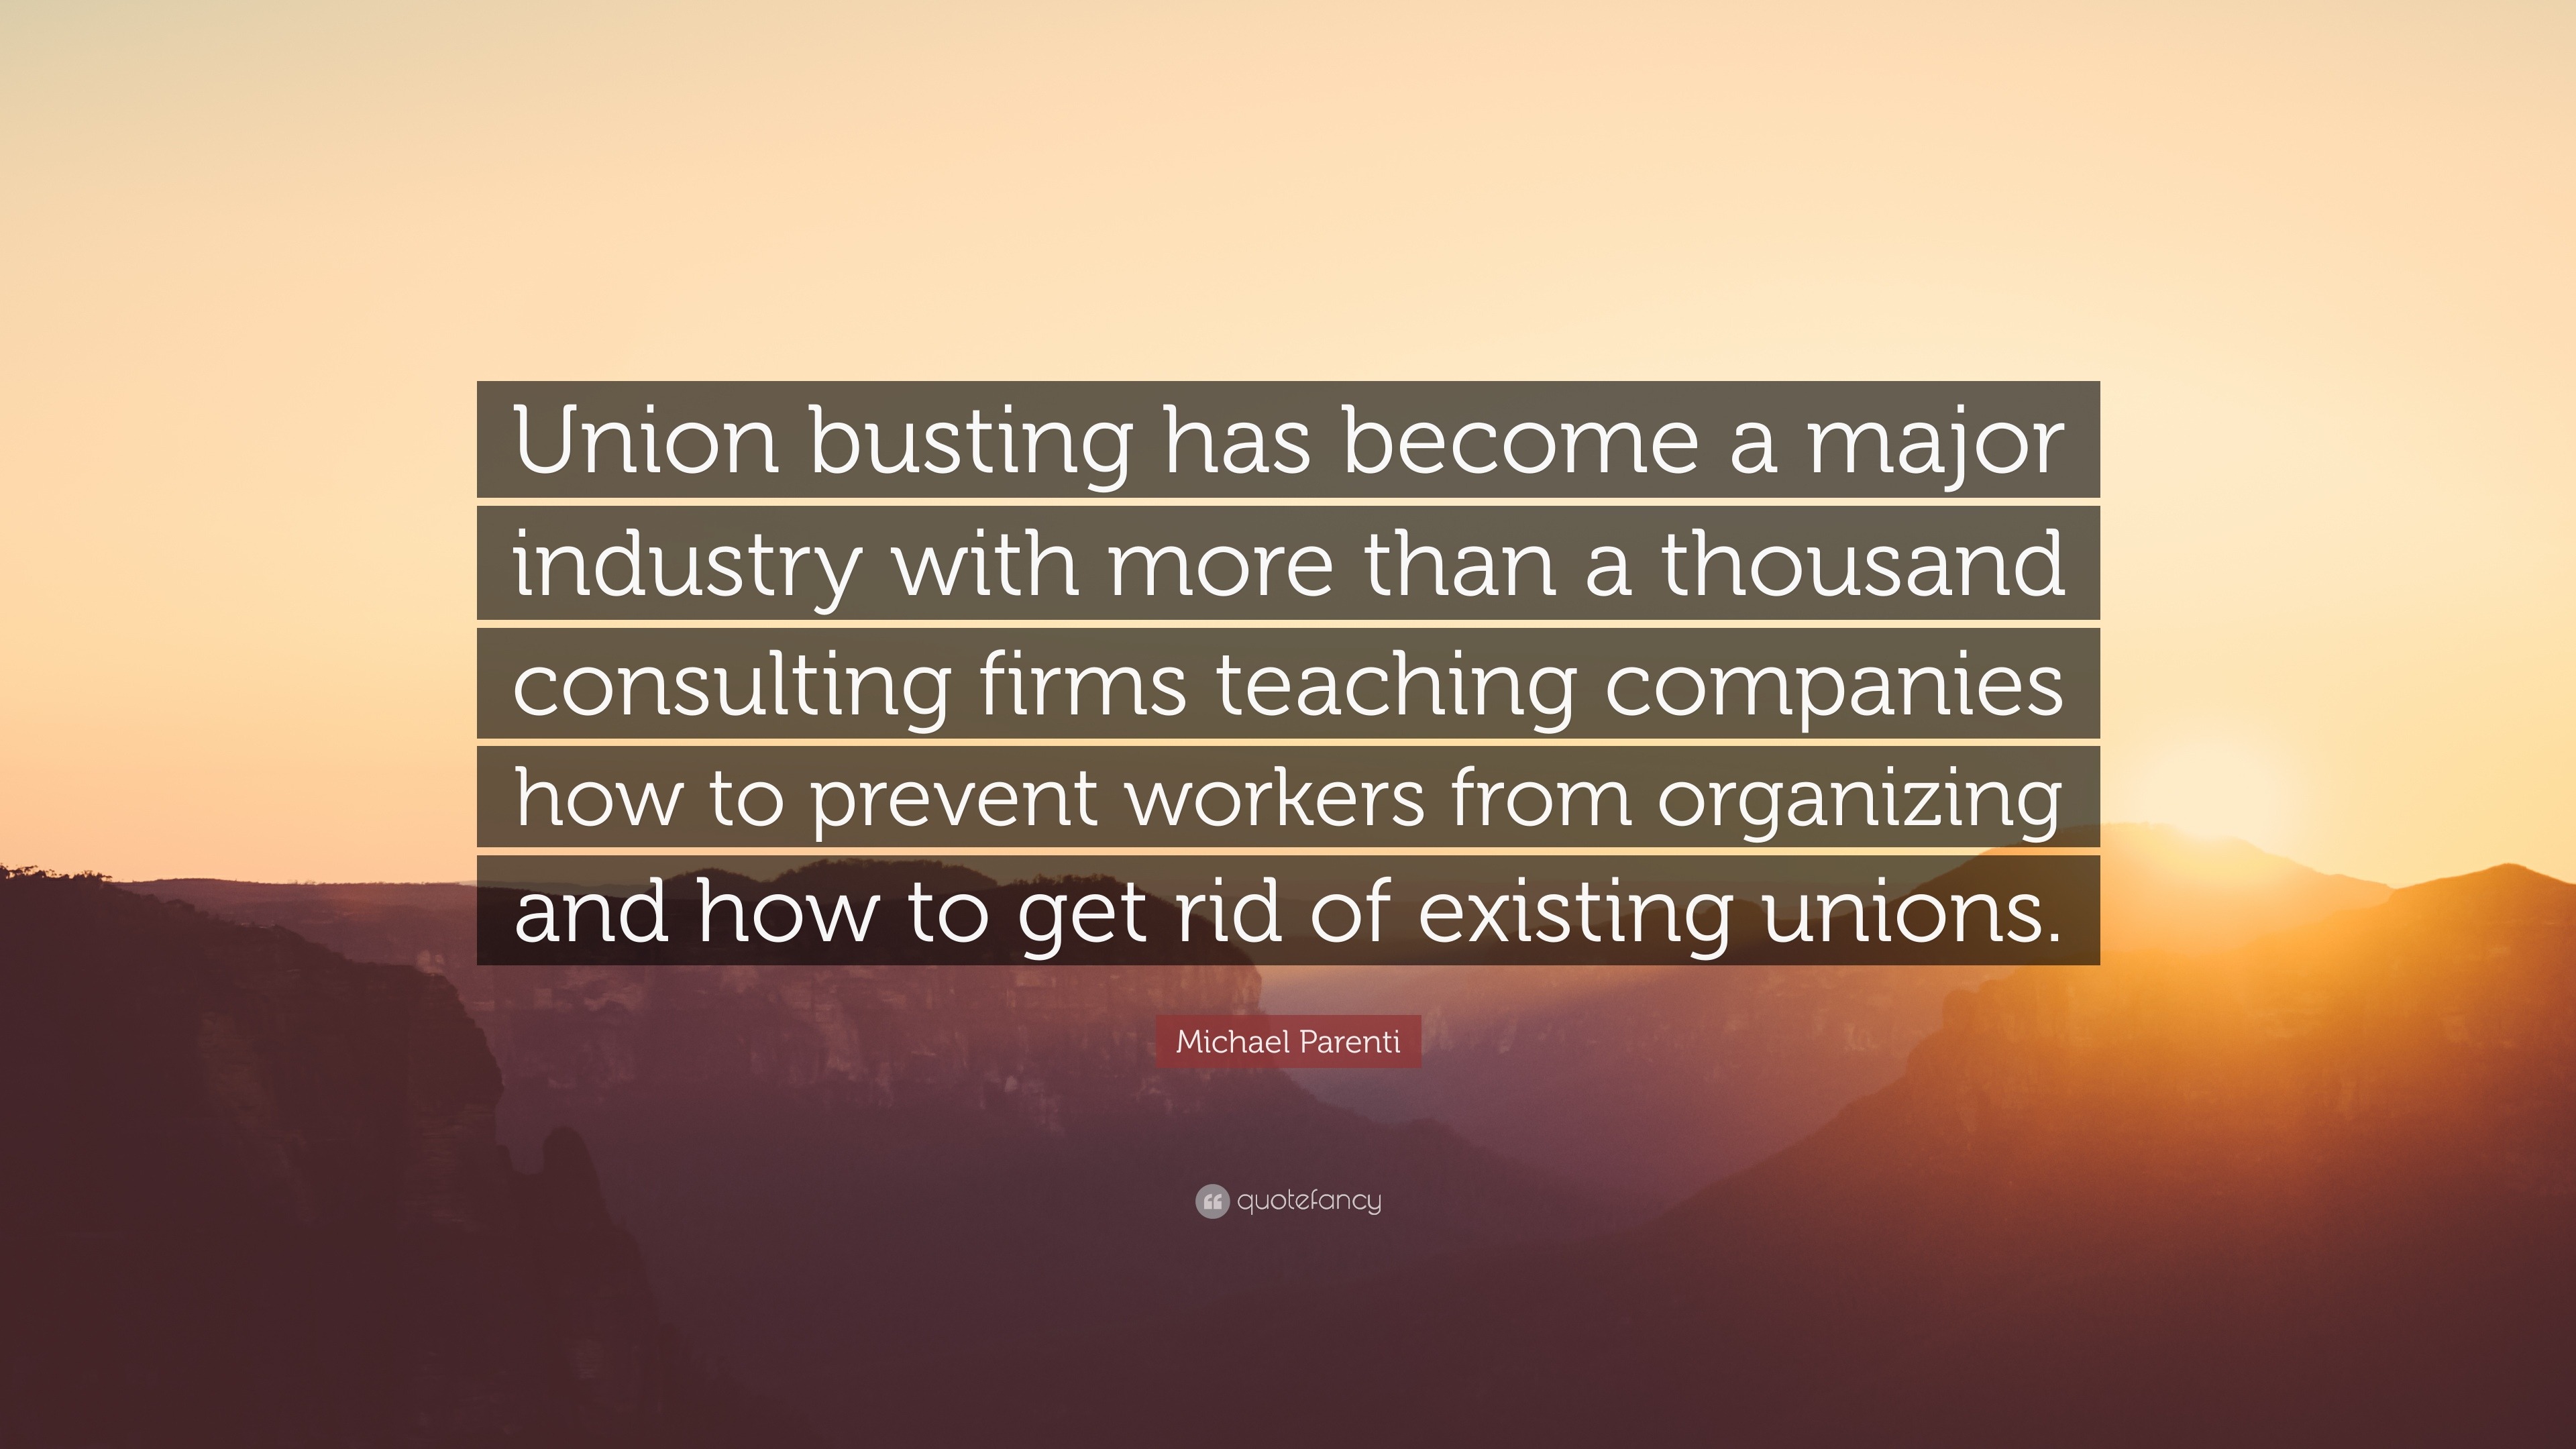 Michael Parenti Quote: “Union busting has become a major industry with more  than a thousand consulting firms teaching companies how to prevent w”